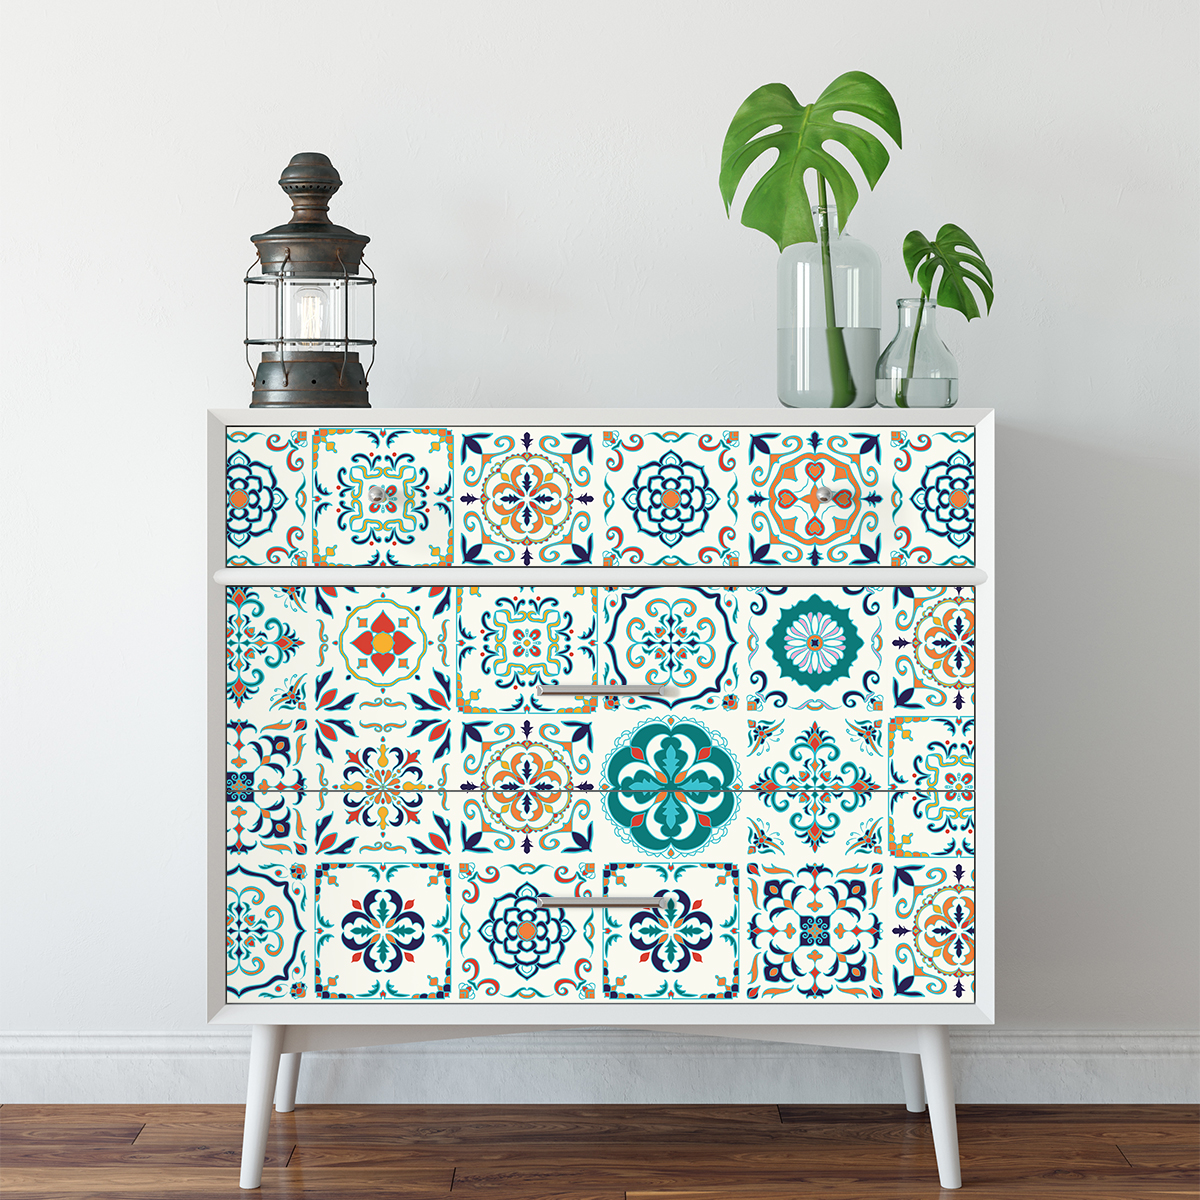 24 wall stickers tiled furniture solenia